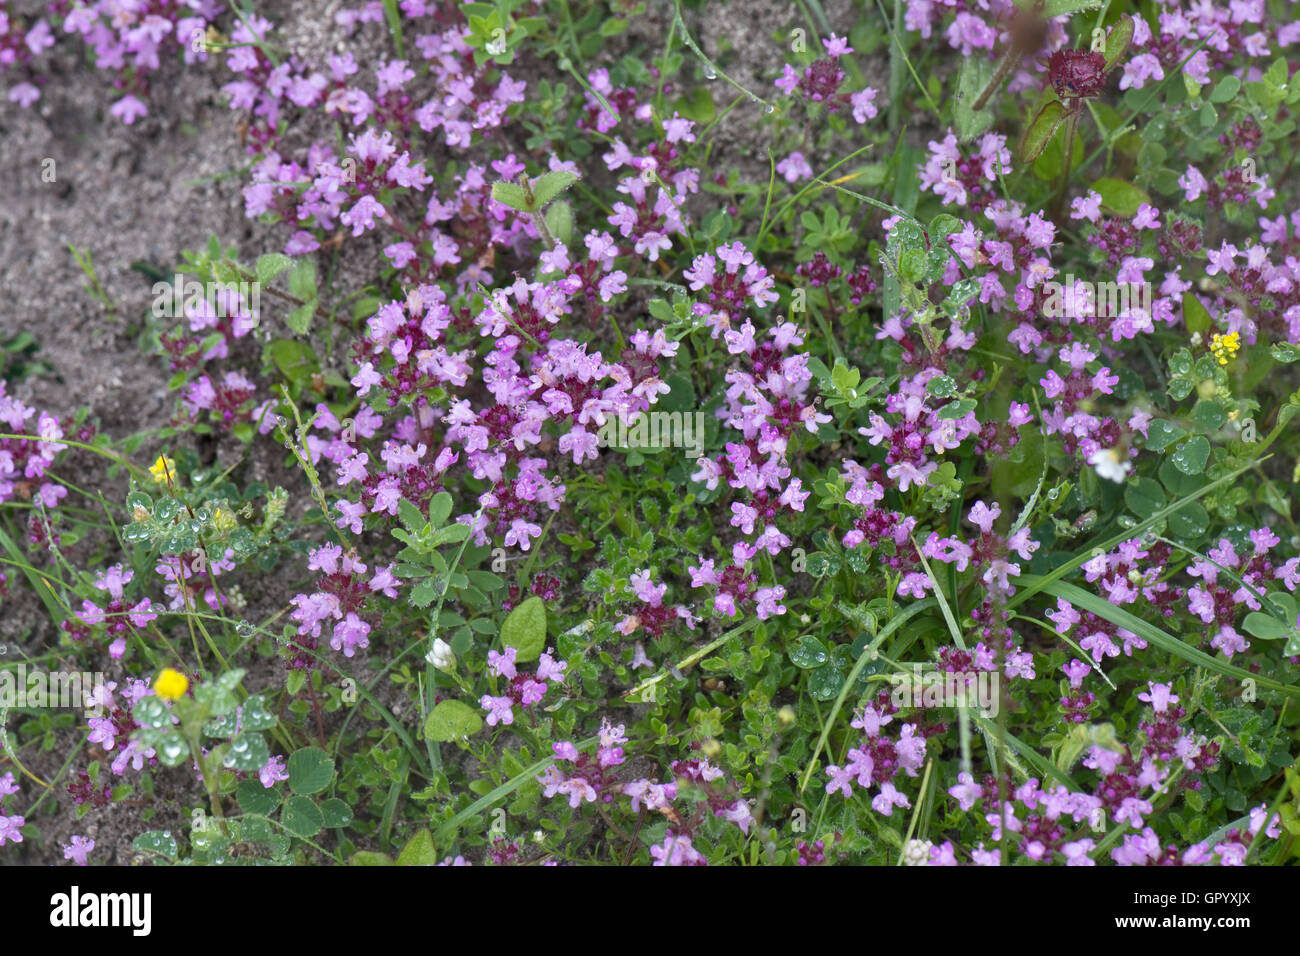 Wild thyme, Thymus serpyllum, flowering on the floor of a disused chalk quarry on a rainy day, June Stock Photo